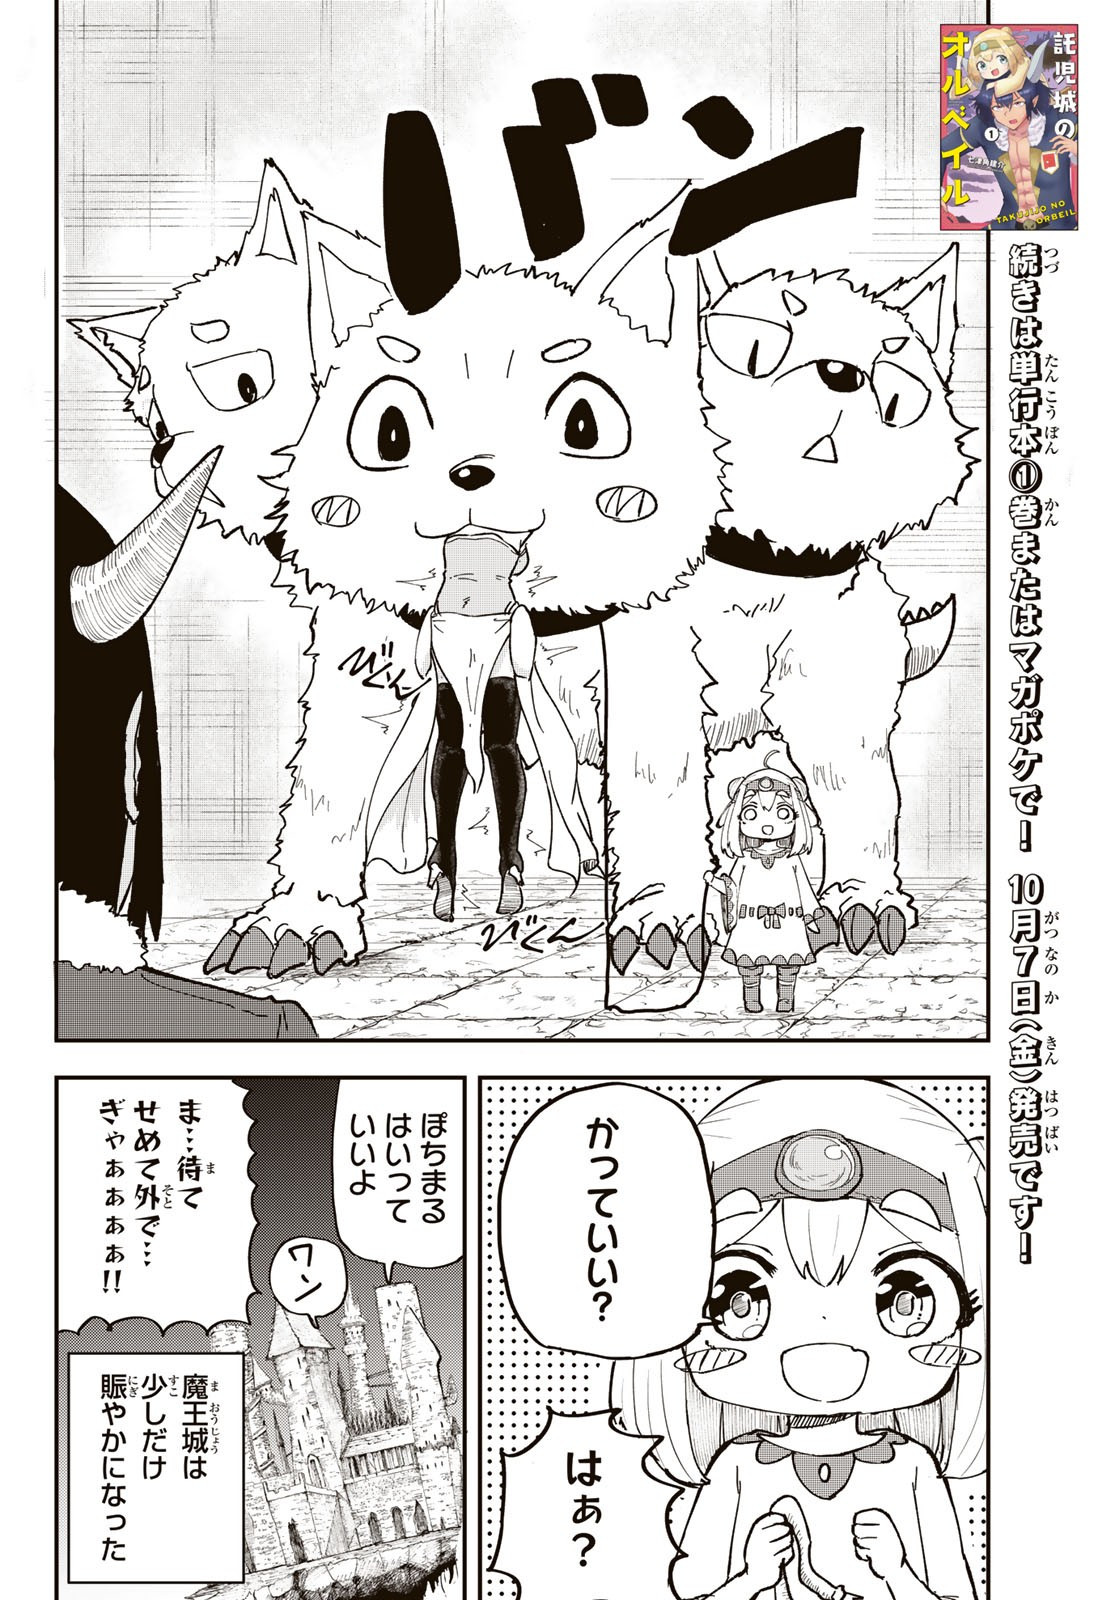 Weekly Shōnen Magazine - 週刊少年マガジン - Chapter 2022-45 - Page 531